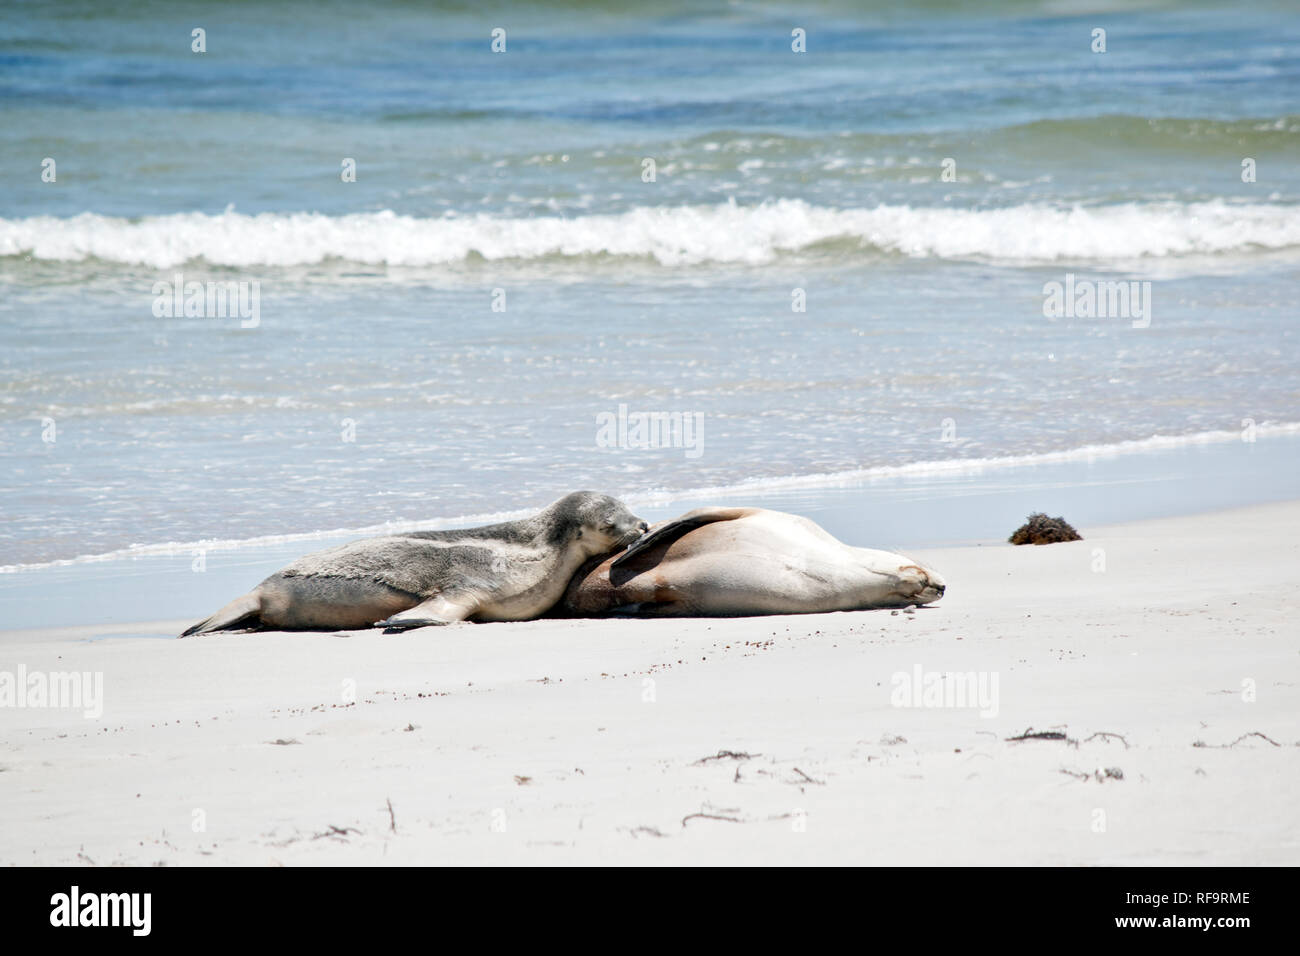 the sea lion is nursing her young pup on a beach at Seal Bay Stock Photo